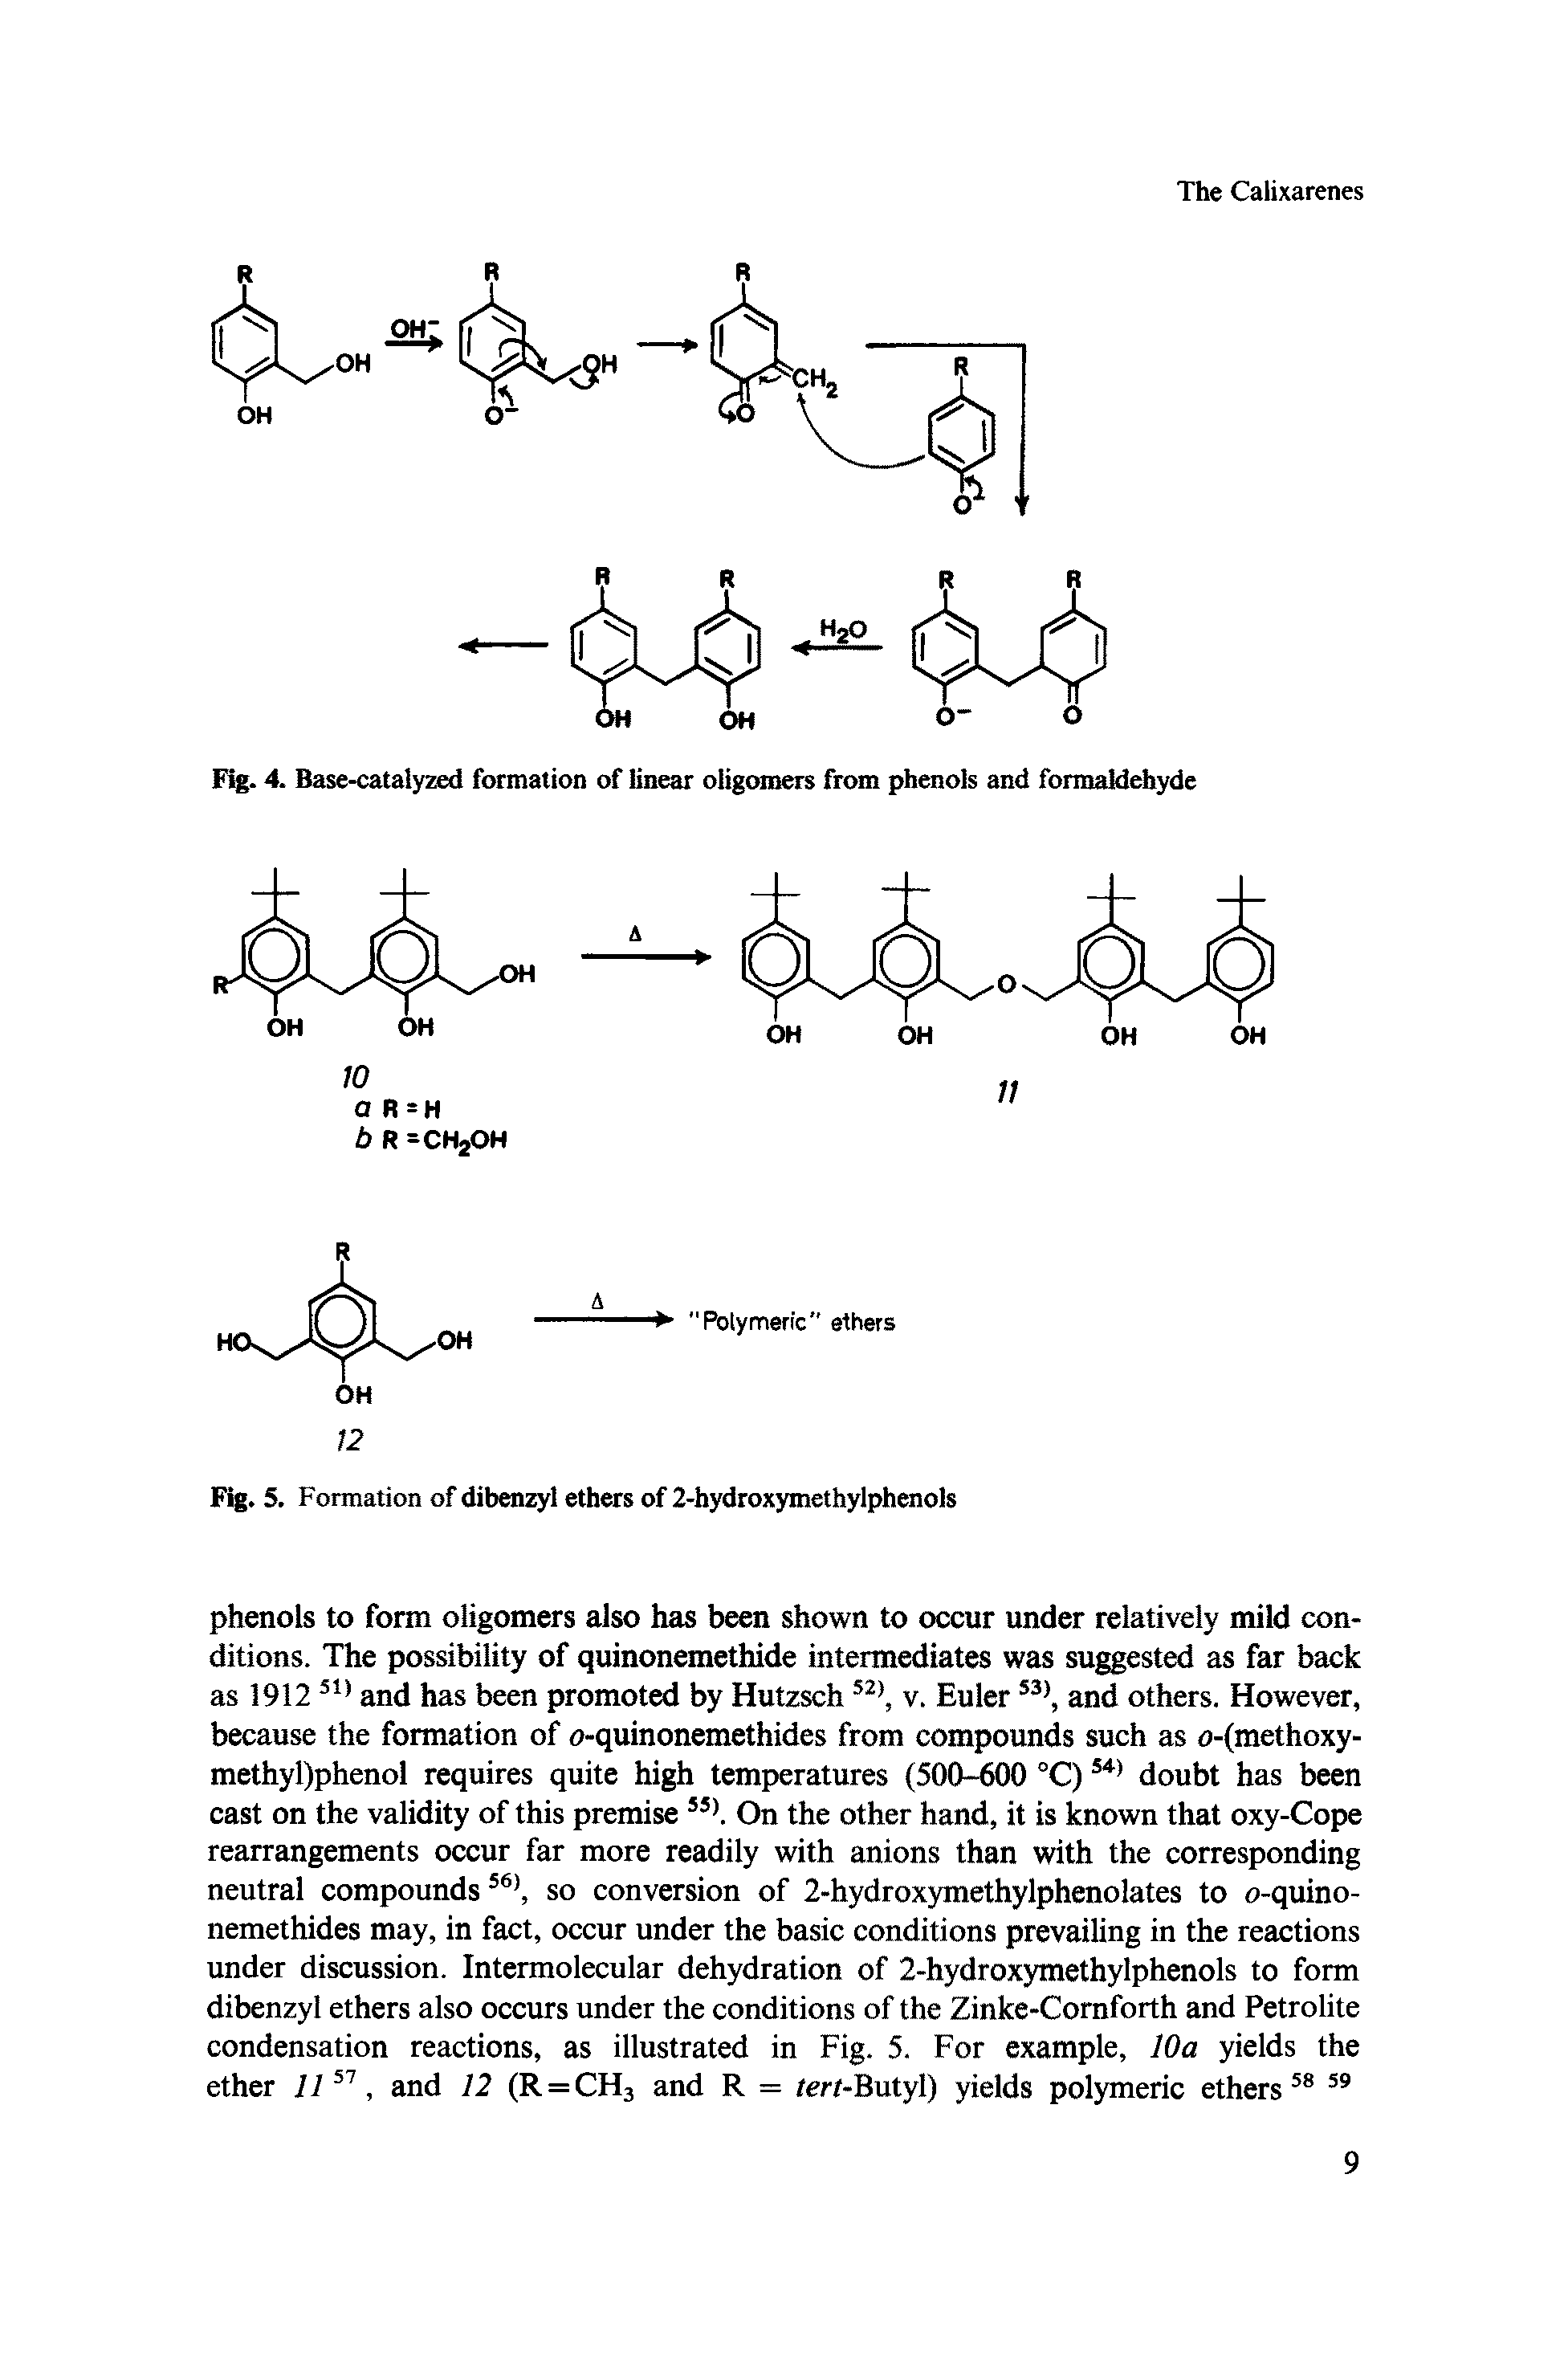 Fig. 4. Base-catalyzed formation of linear oligomers from phenols and formaldehyde...